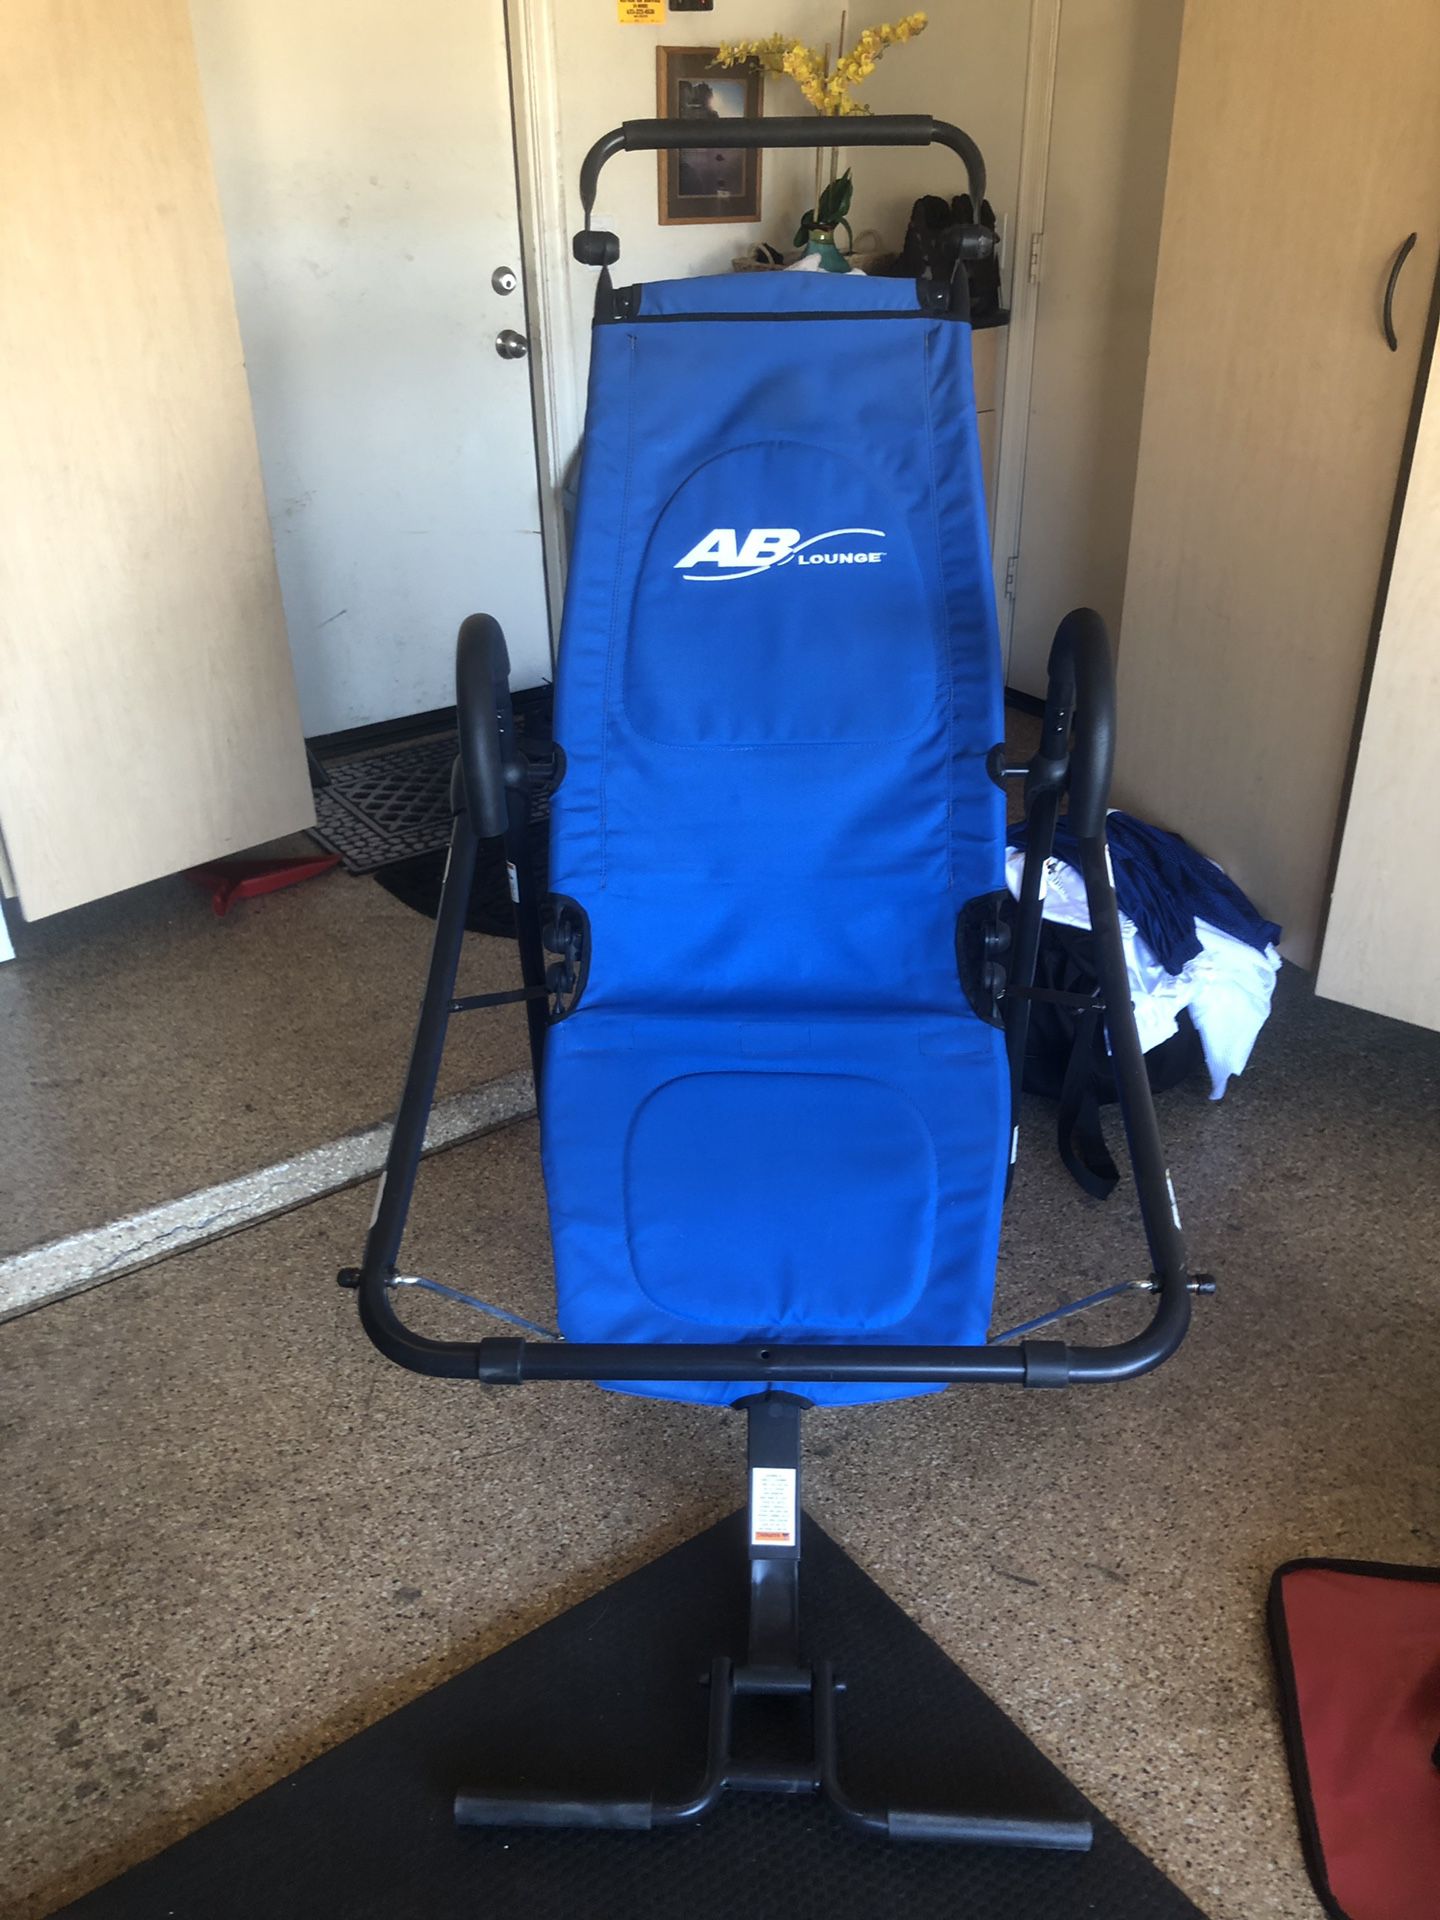 AB Lounge 2 Abdominal workout exercise lounger